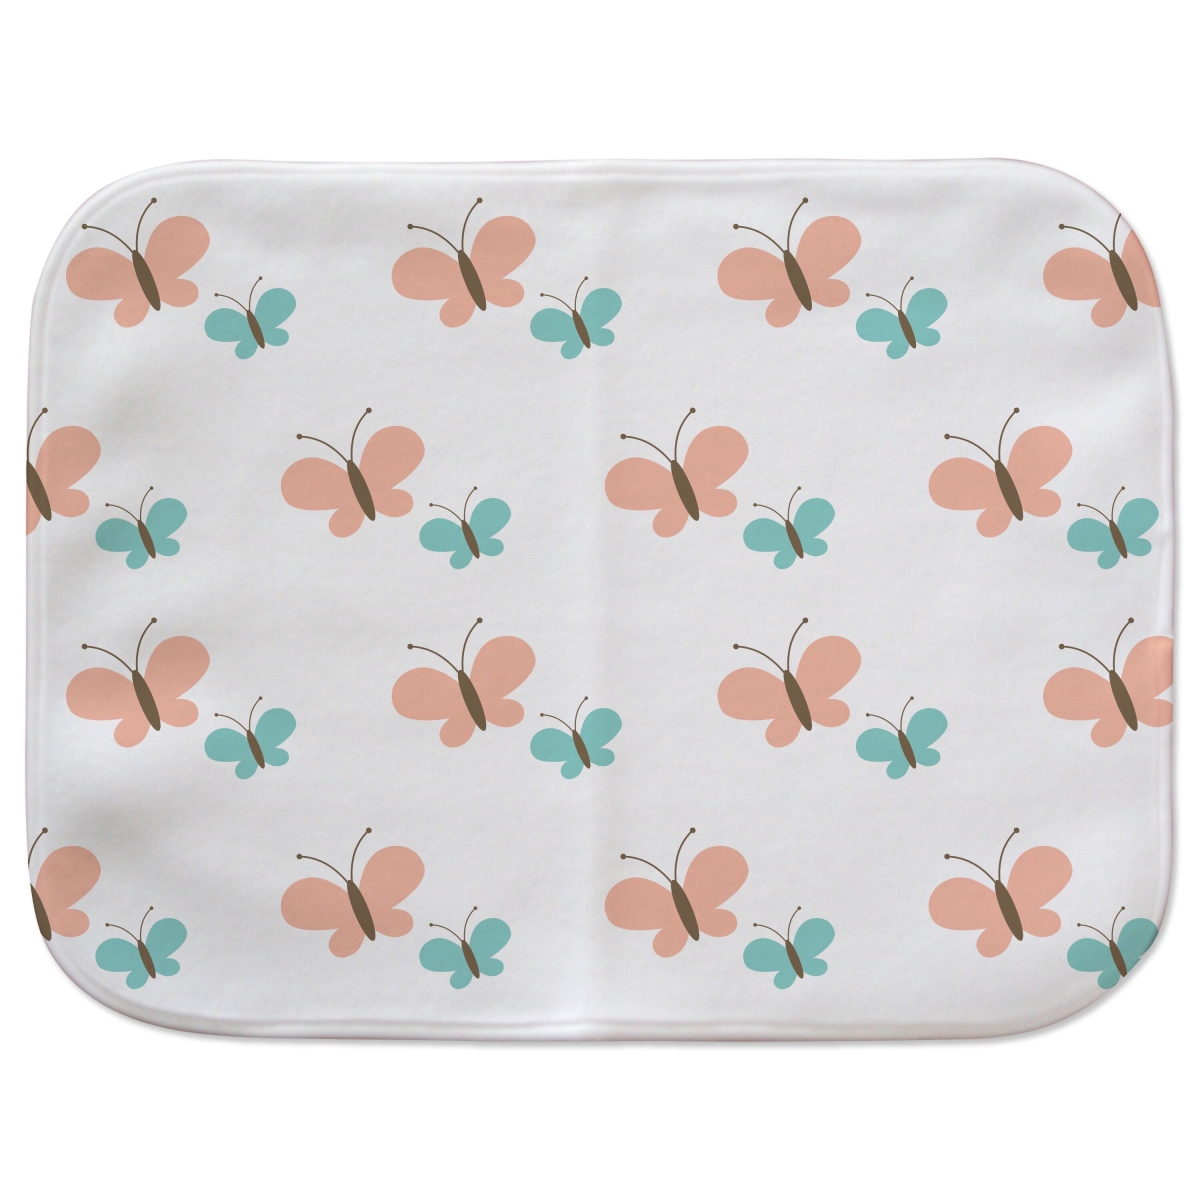 702cloth 15.75 X 11.75 In. Butterflies Burp Cloth - 100 Percent Polyester